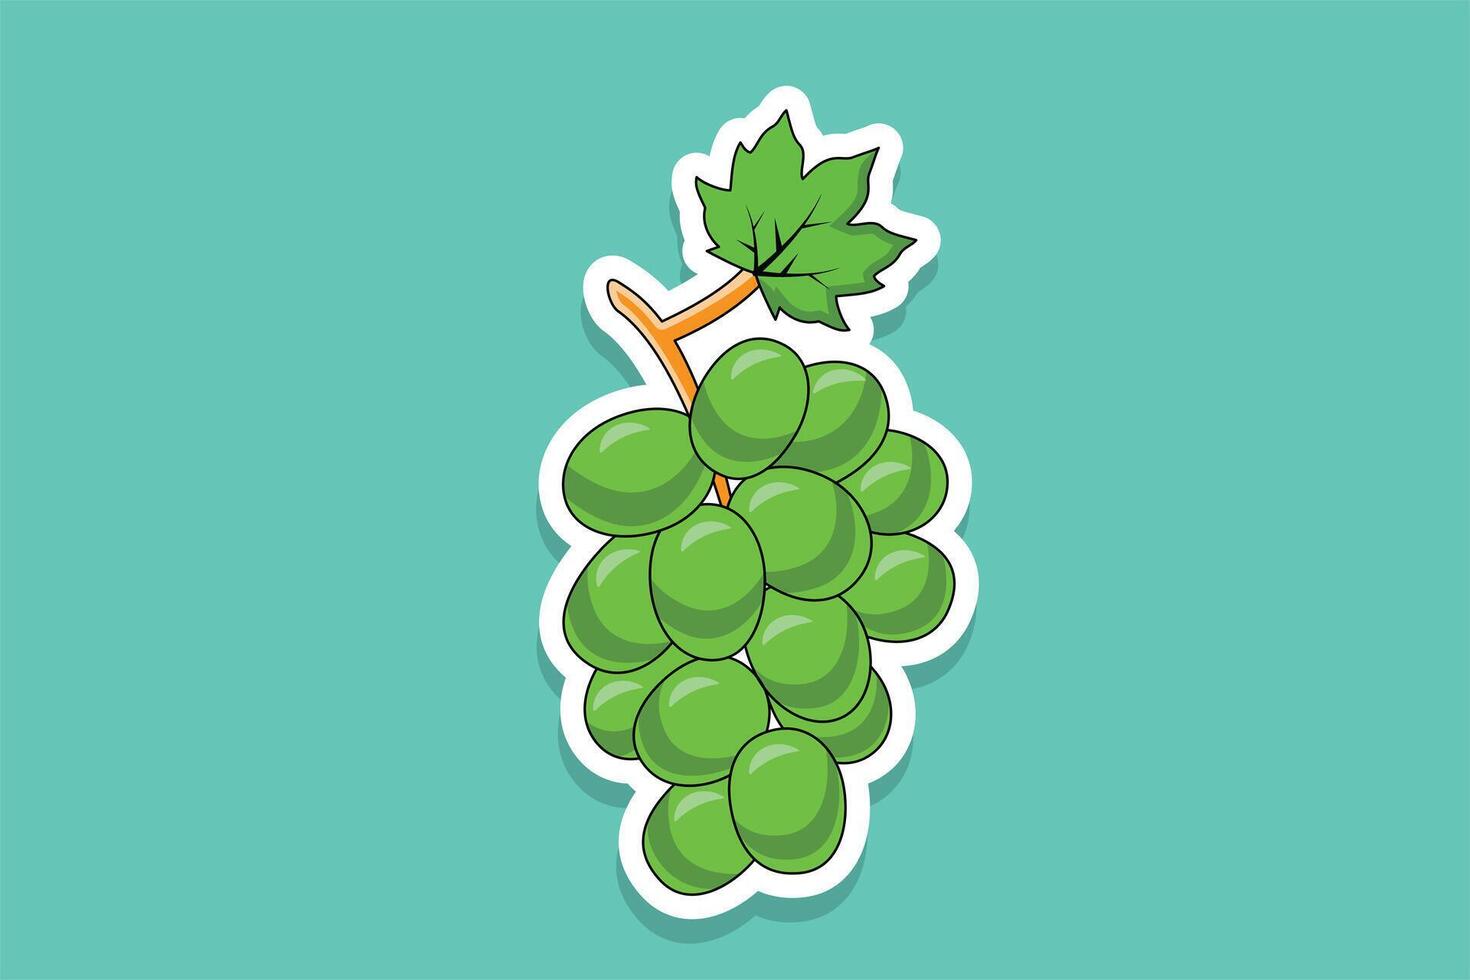 Green Grapes Sticker design vector illustration. A bunch of grapes fruit. Beautiful grapes with green leaf sticker design logo with shadow.